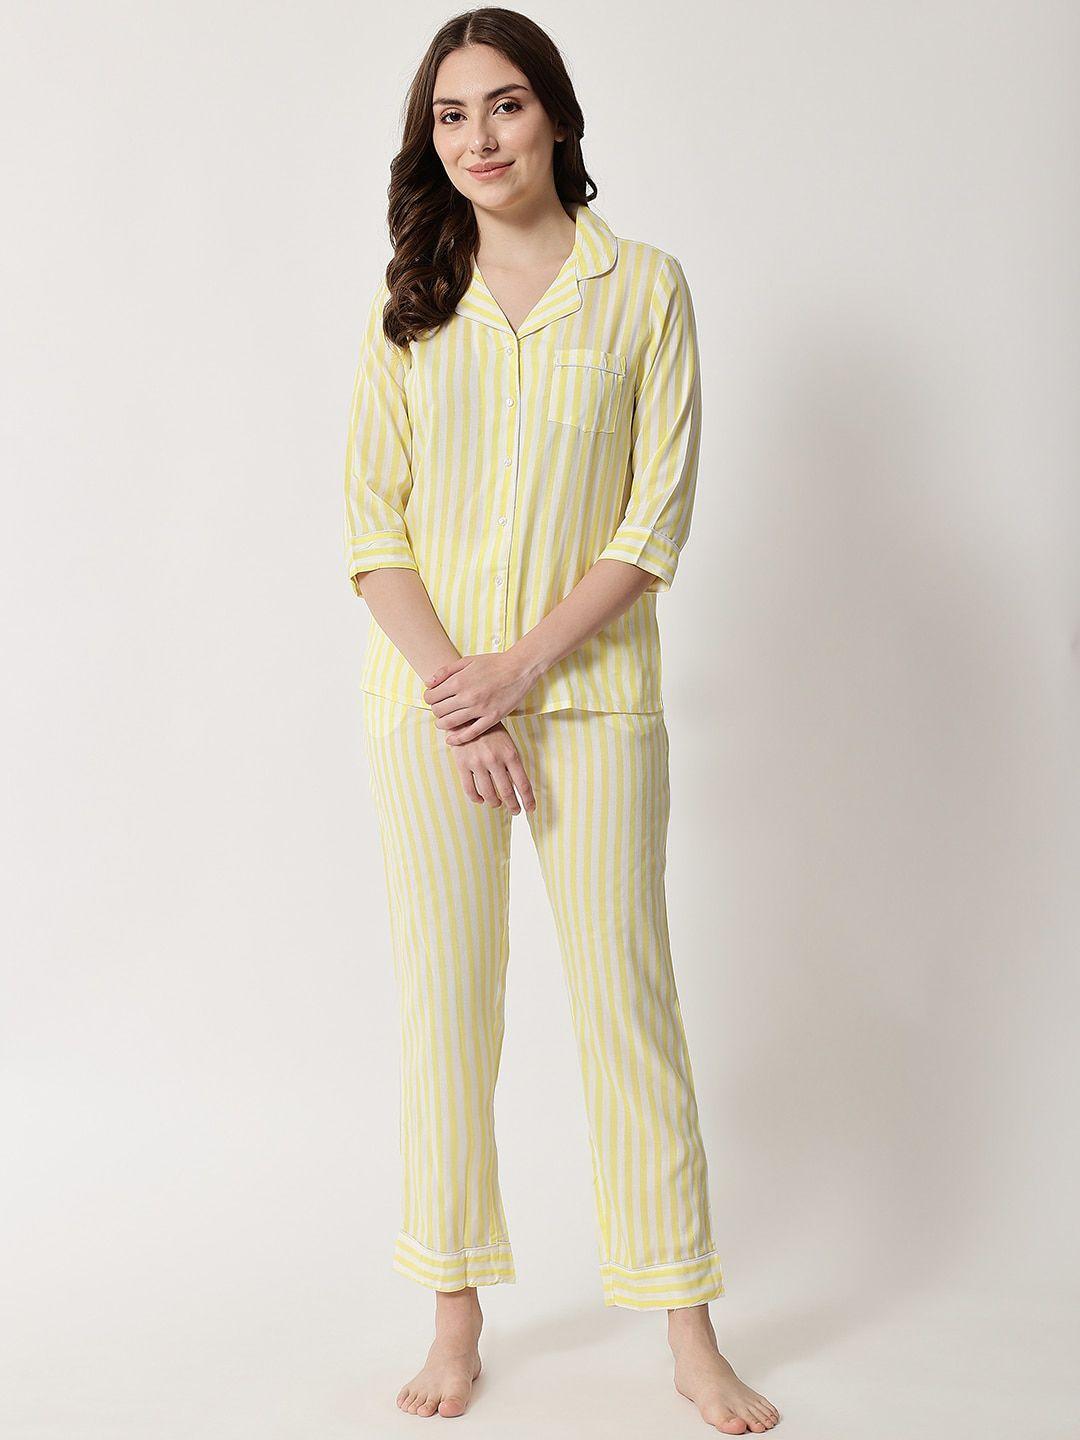 here&now women yellow & white striped night suit